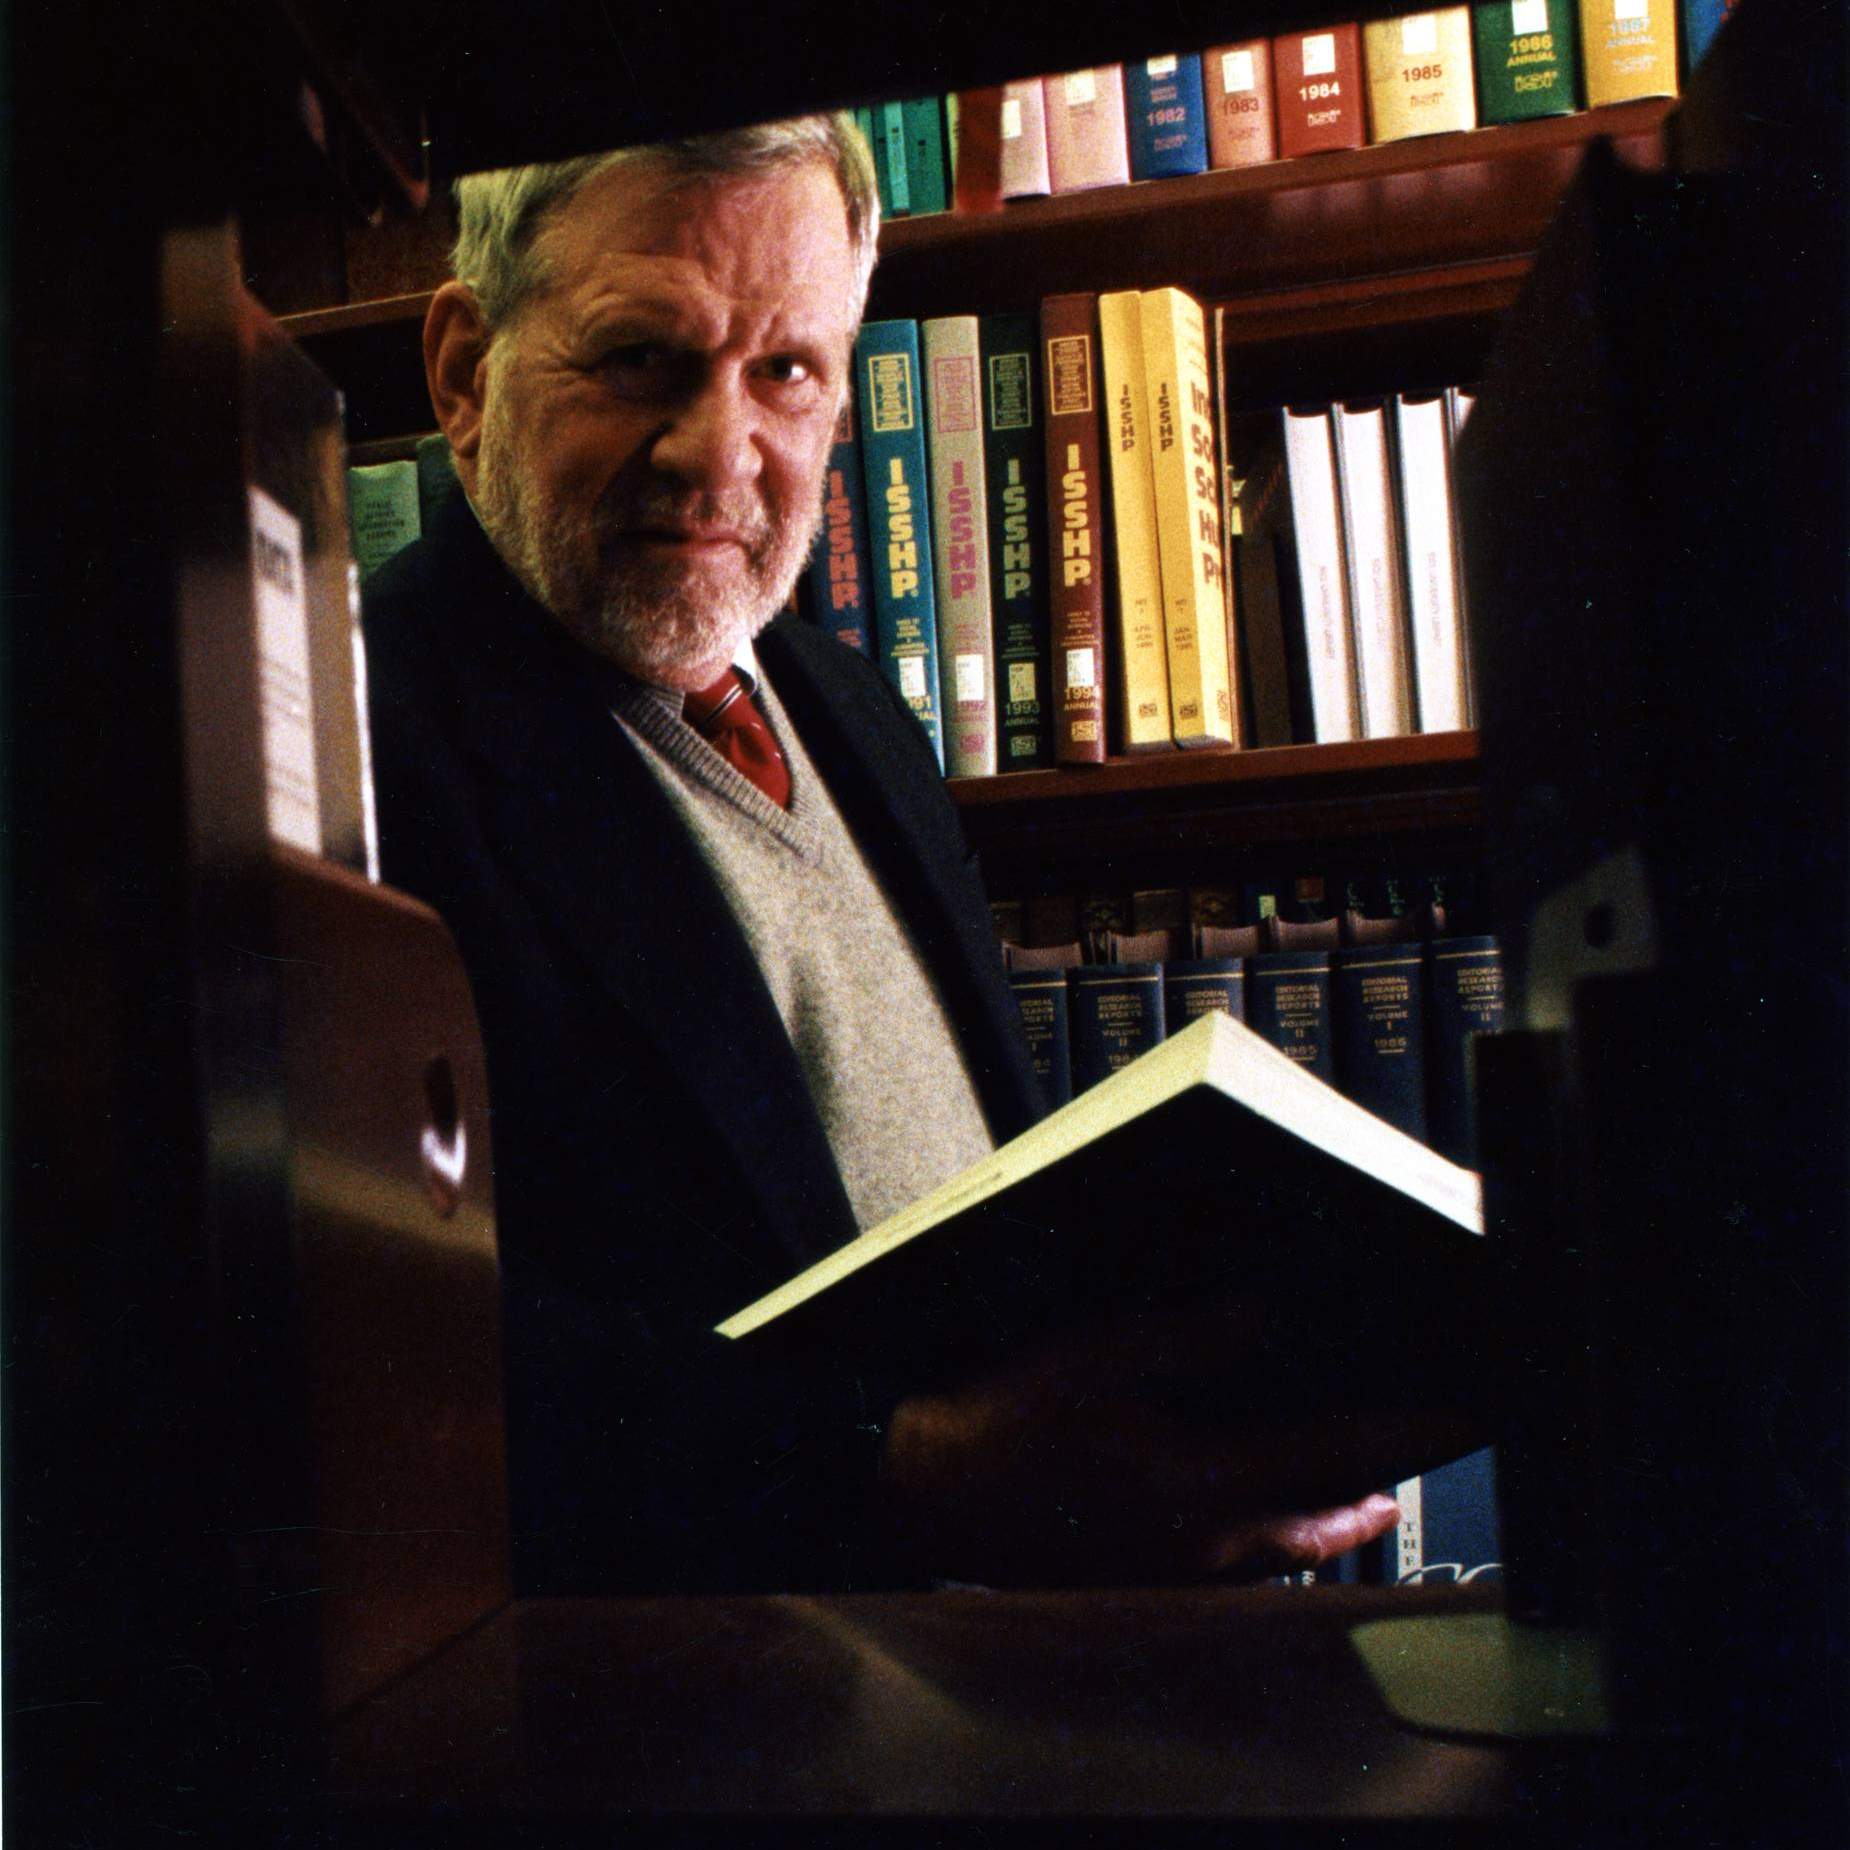 Bill Hobby standing in the stacks at Fondren Library at Rice University